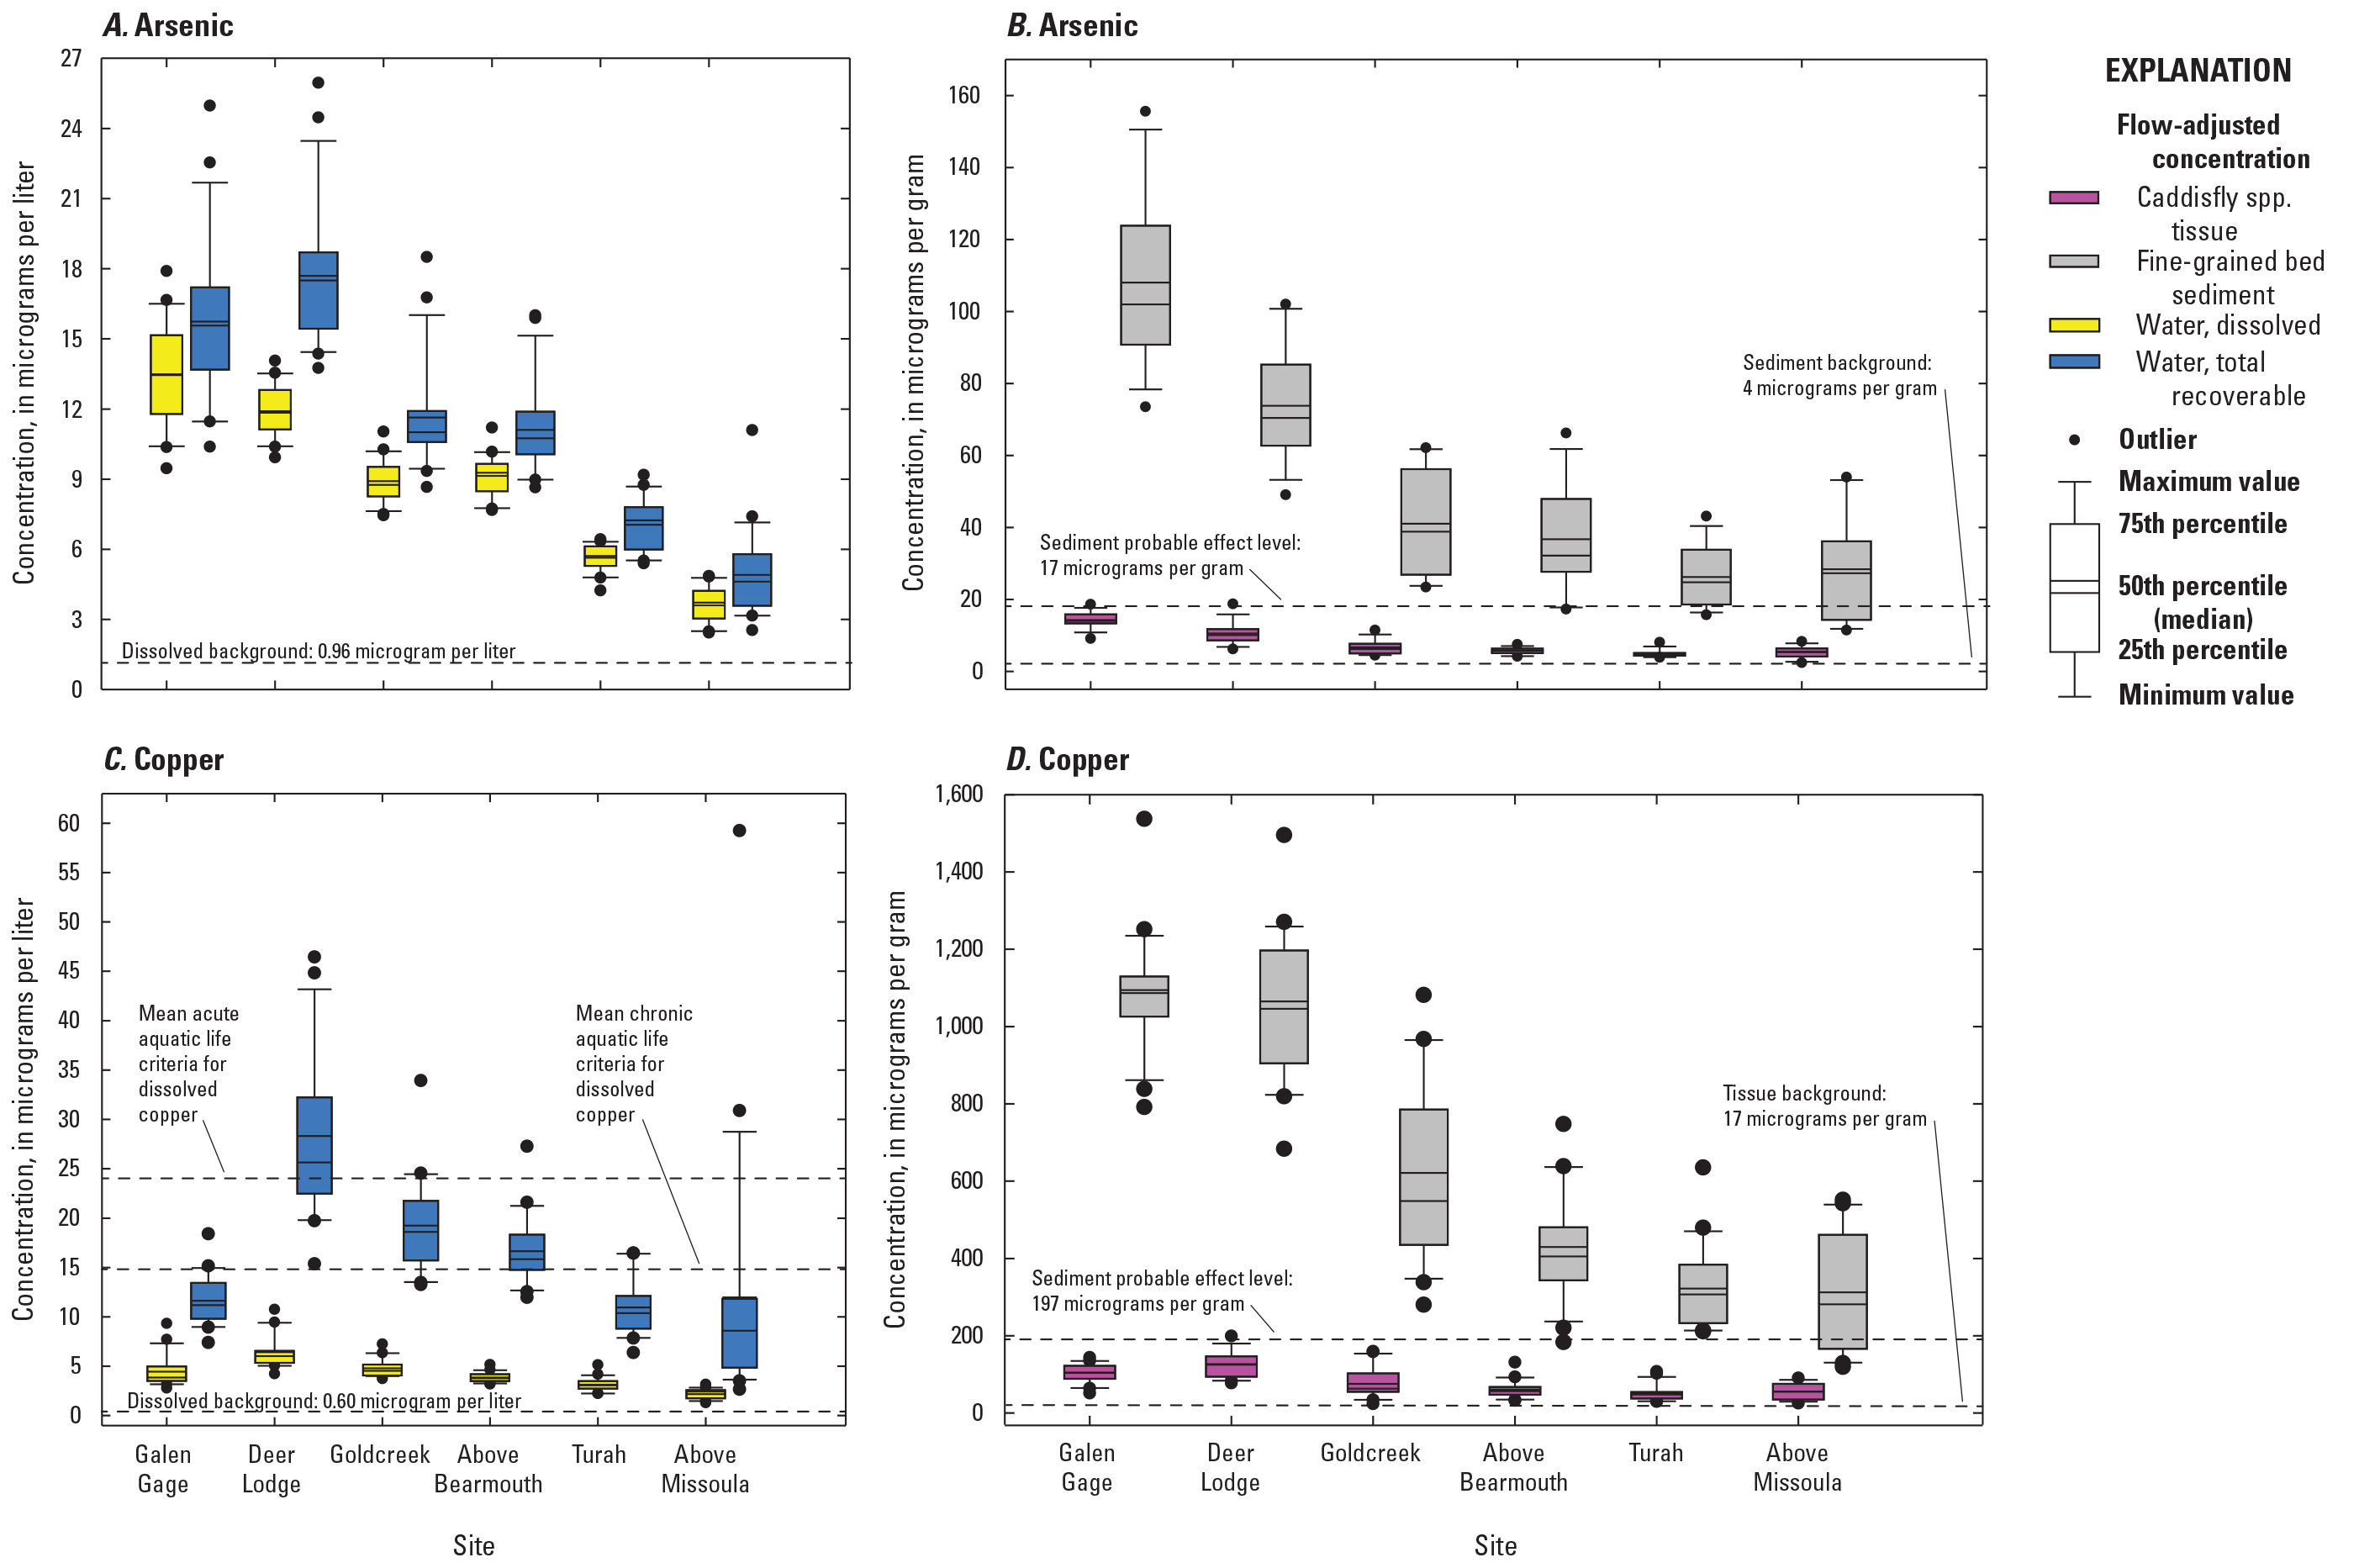 Concentrations in Caddisfly were less than sediment, and concentrations in dissolved
                              water were less than total recoverable water.